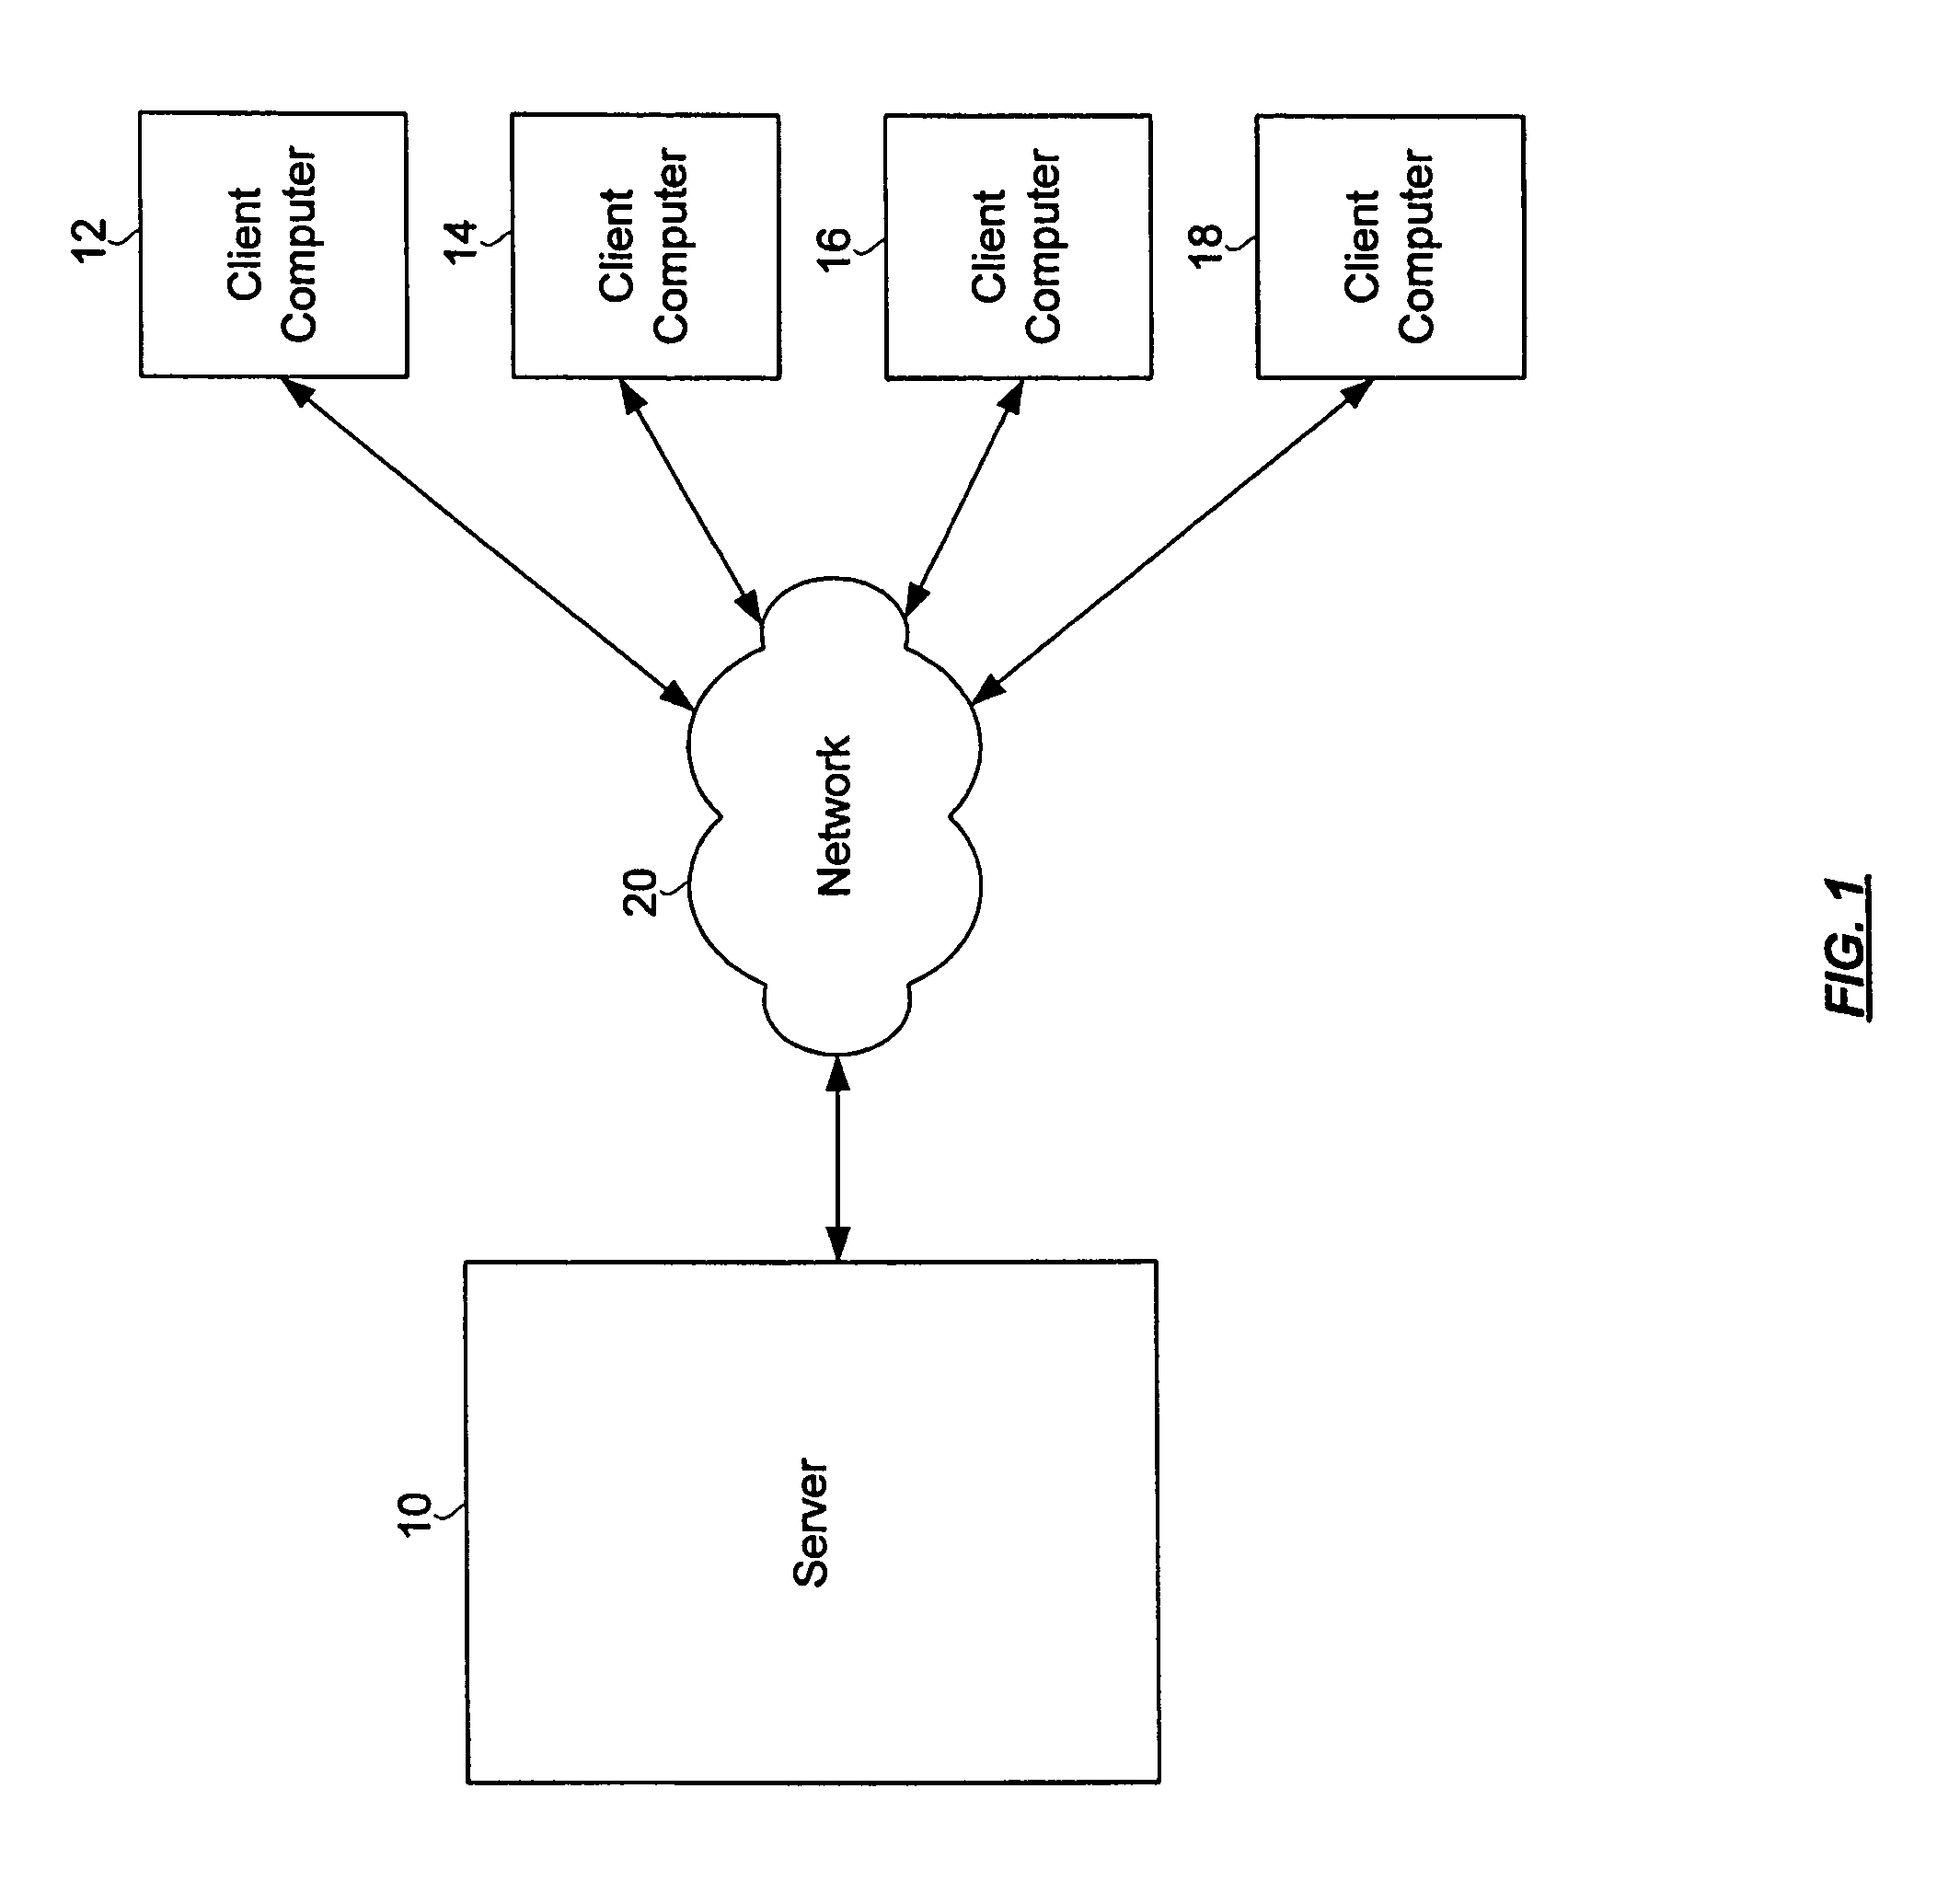 Thread scheduling in chip multithreading processors